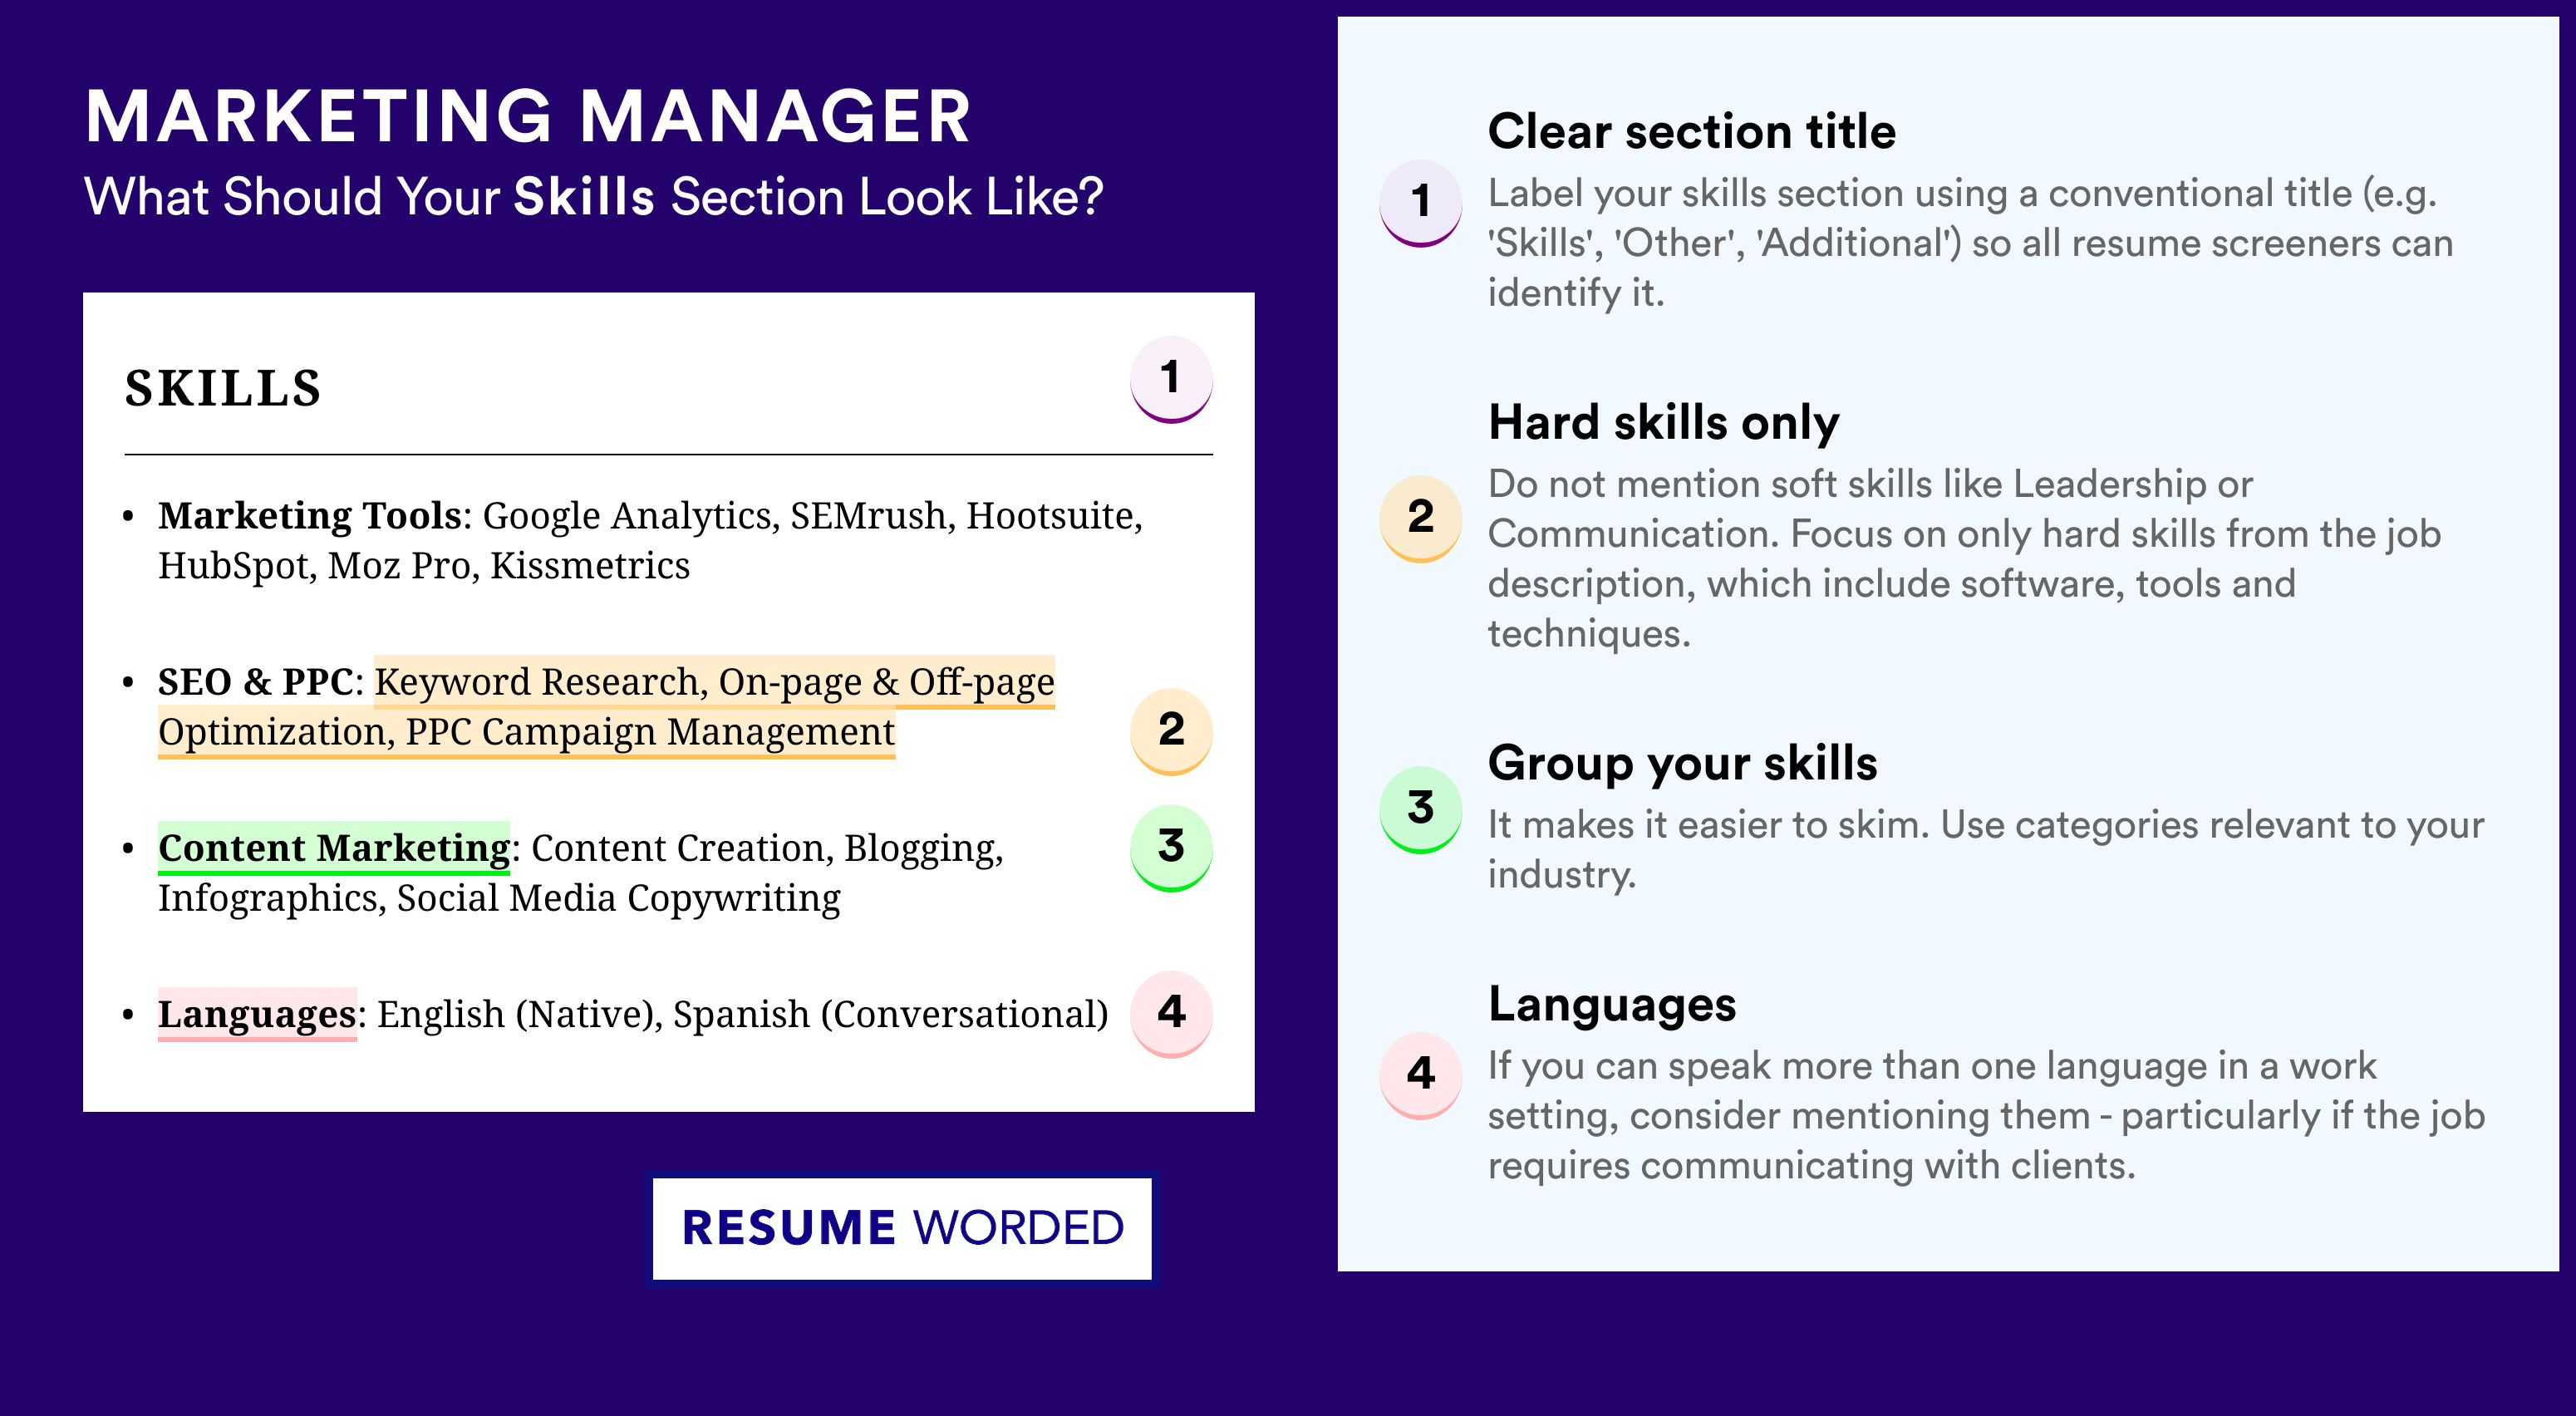 How To Write Your Skills Section - Marketing Manager Roles